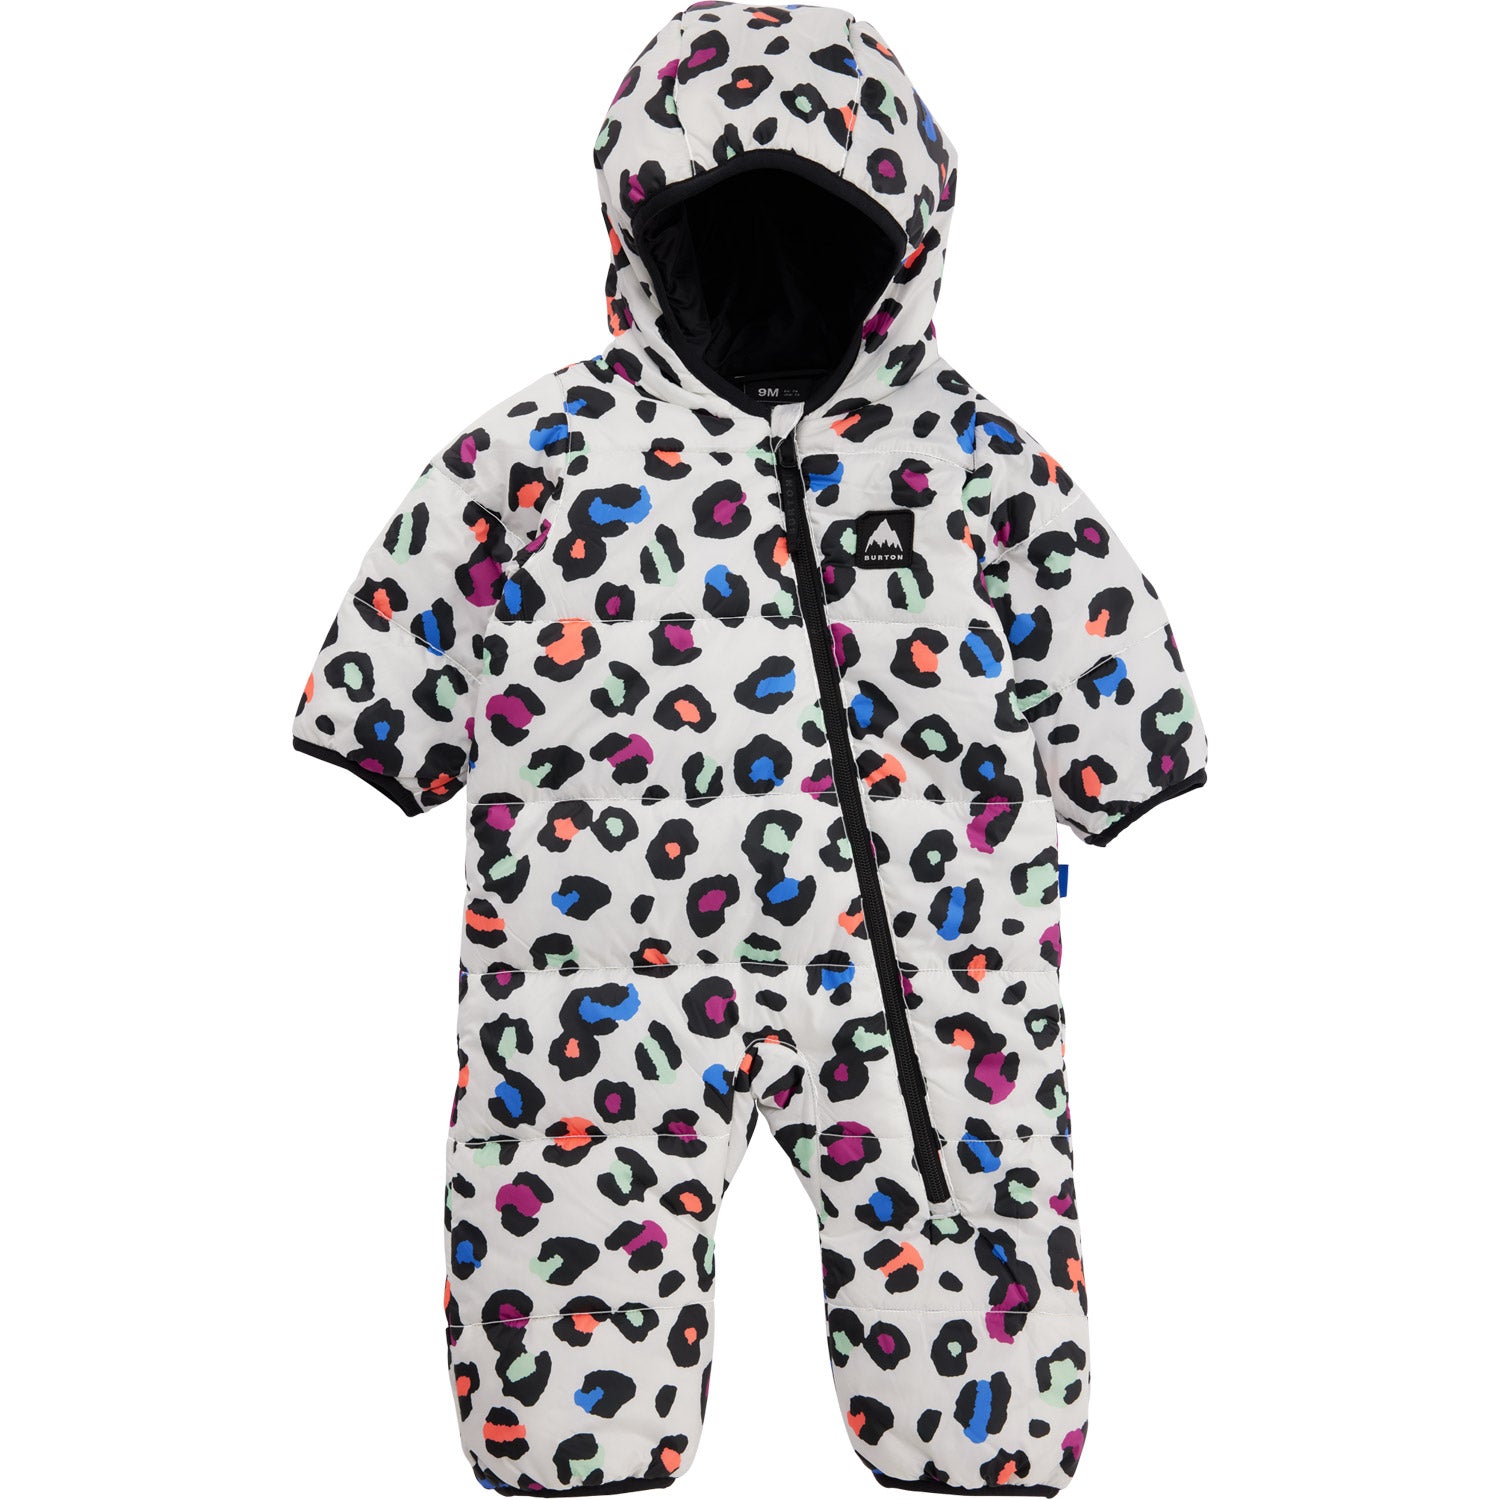 Toddlers' Buddy Bunting Suit